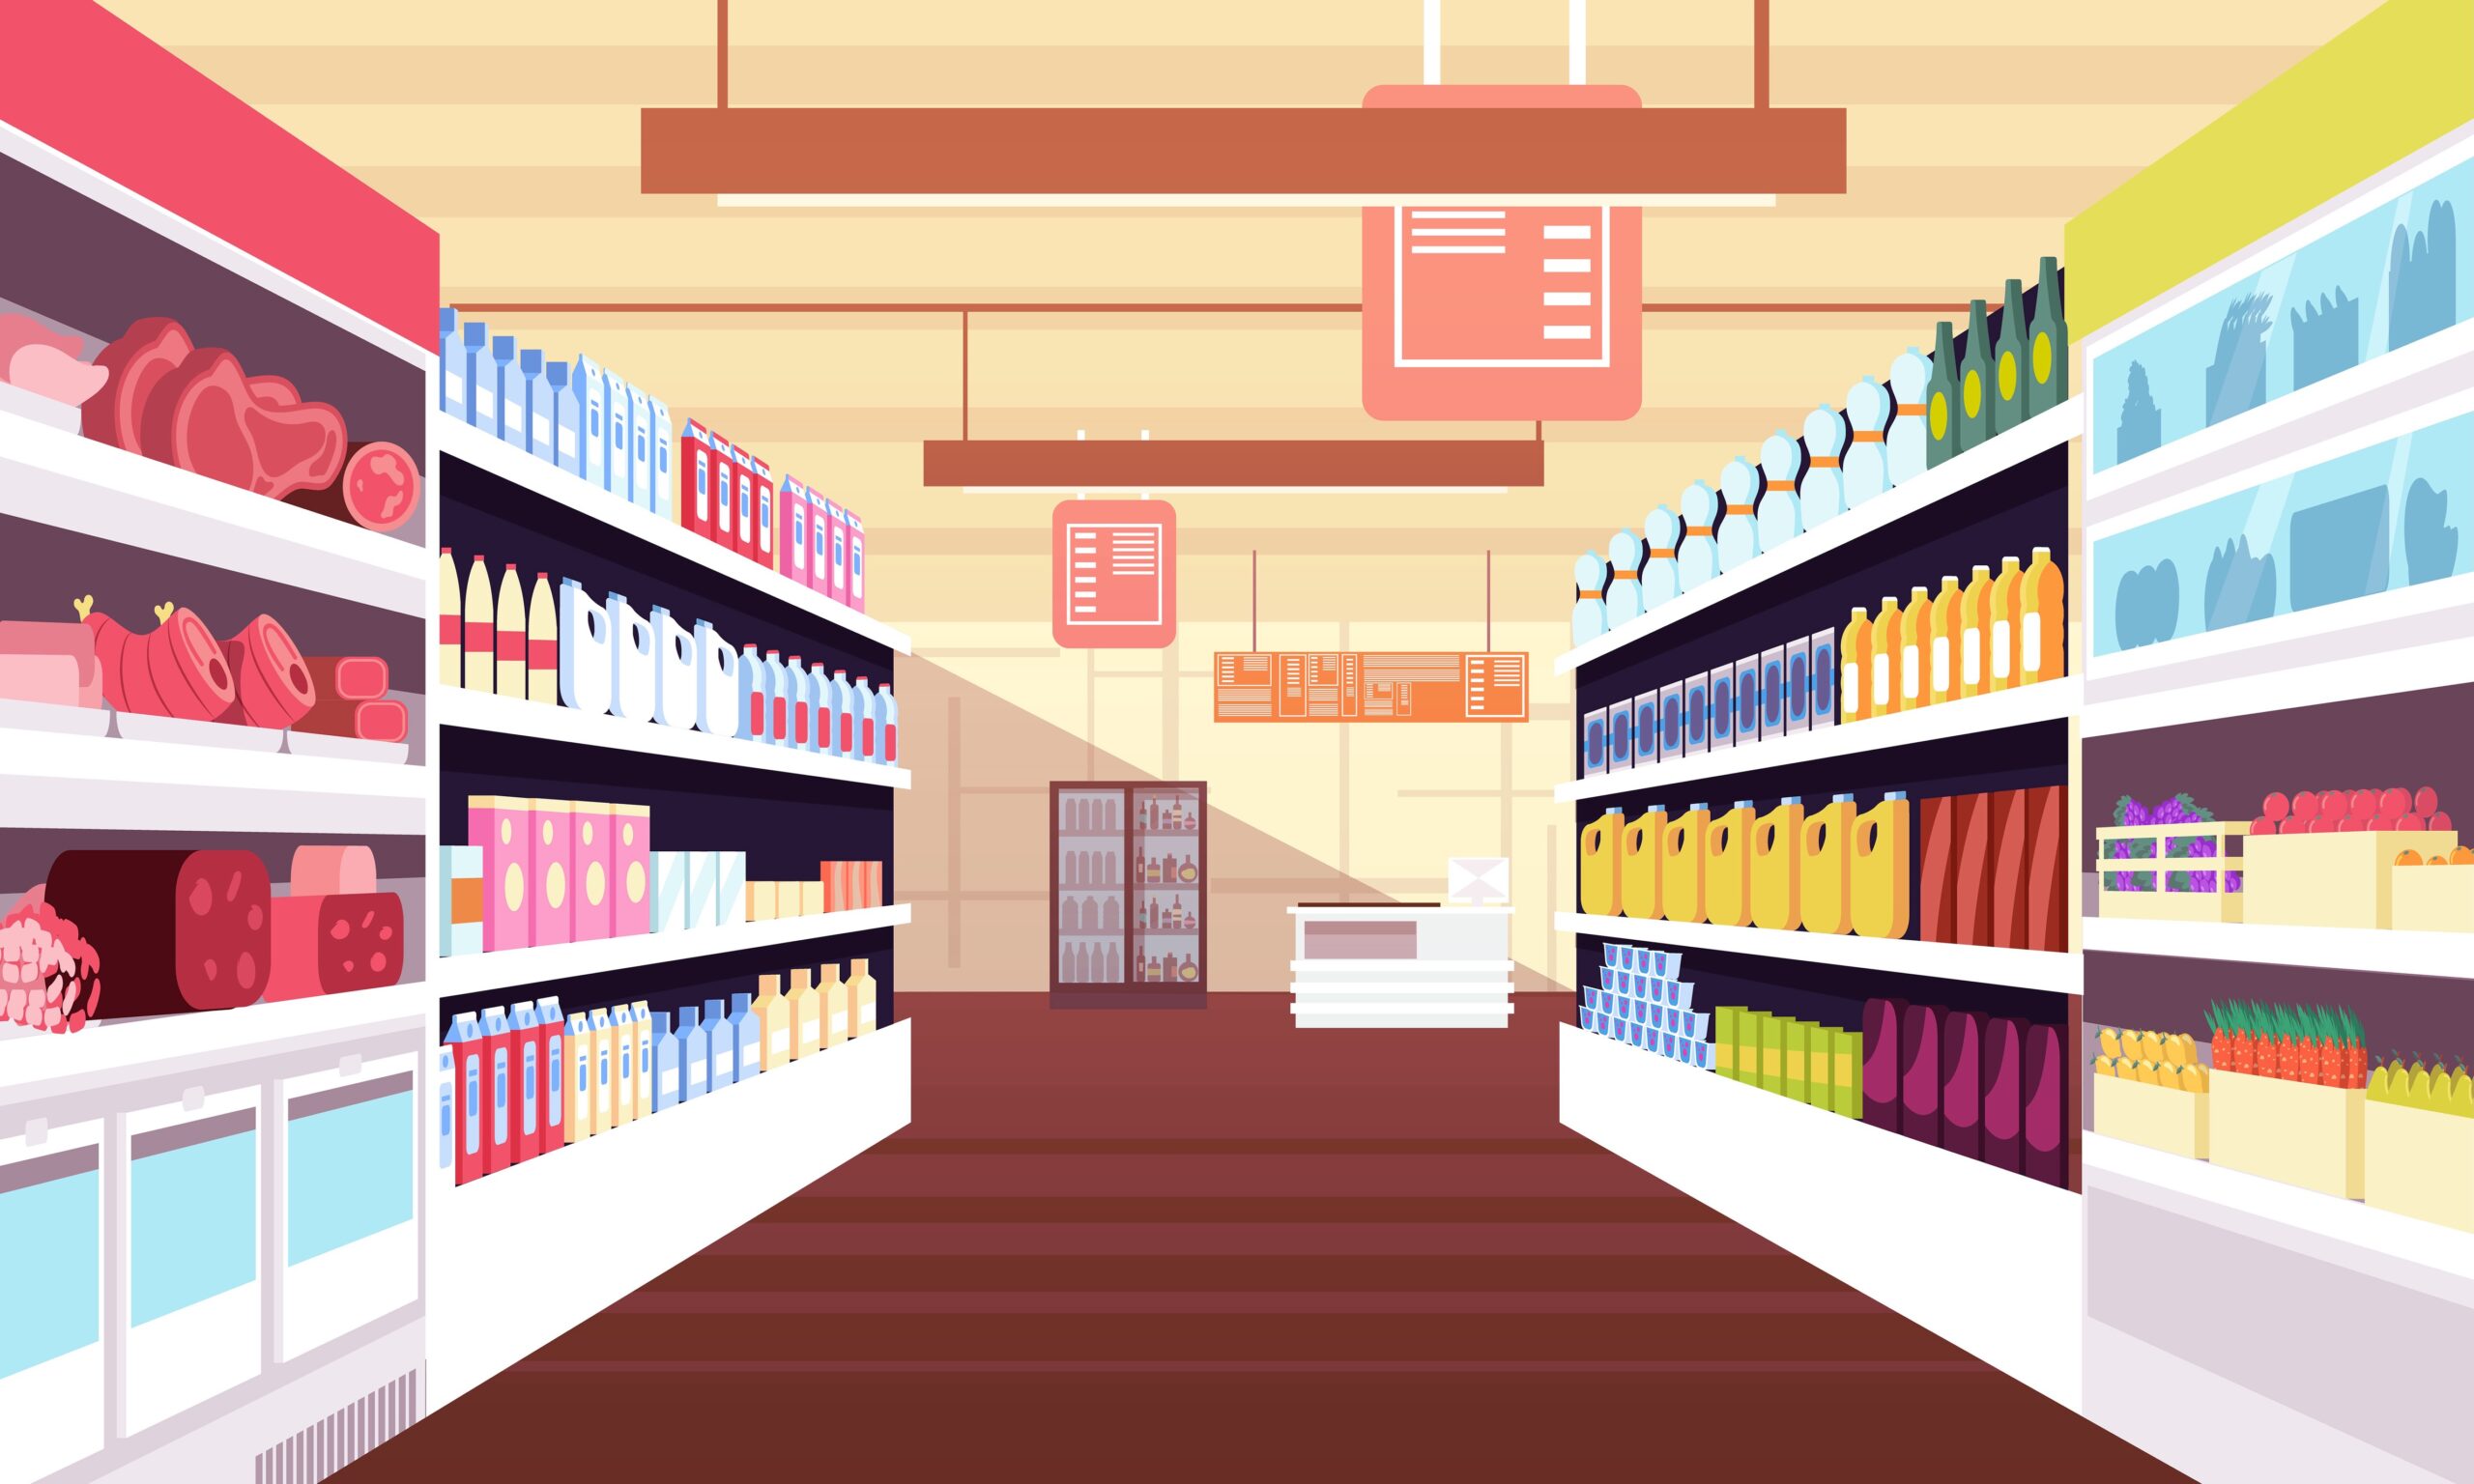 A vector image of a grocery store aisle with meats, vegetables and brand-less products depicted on the store shelves.